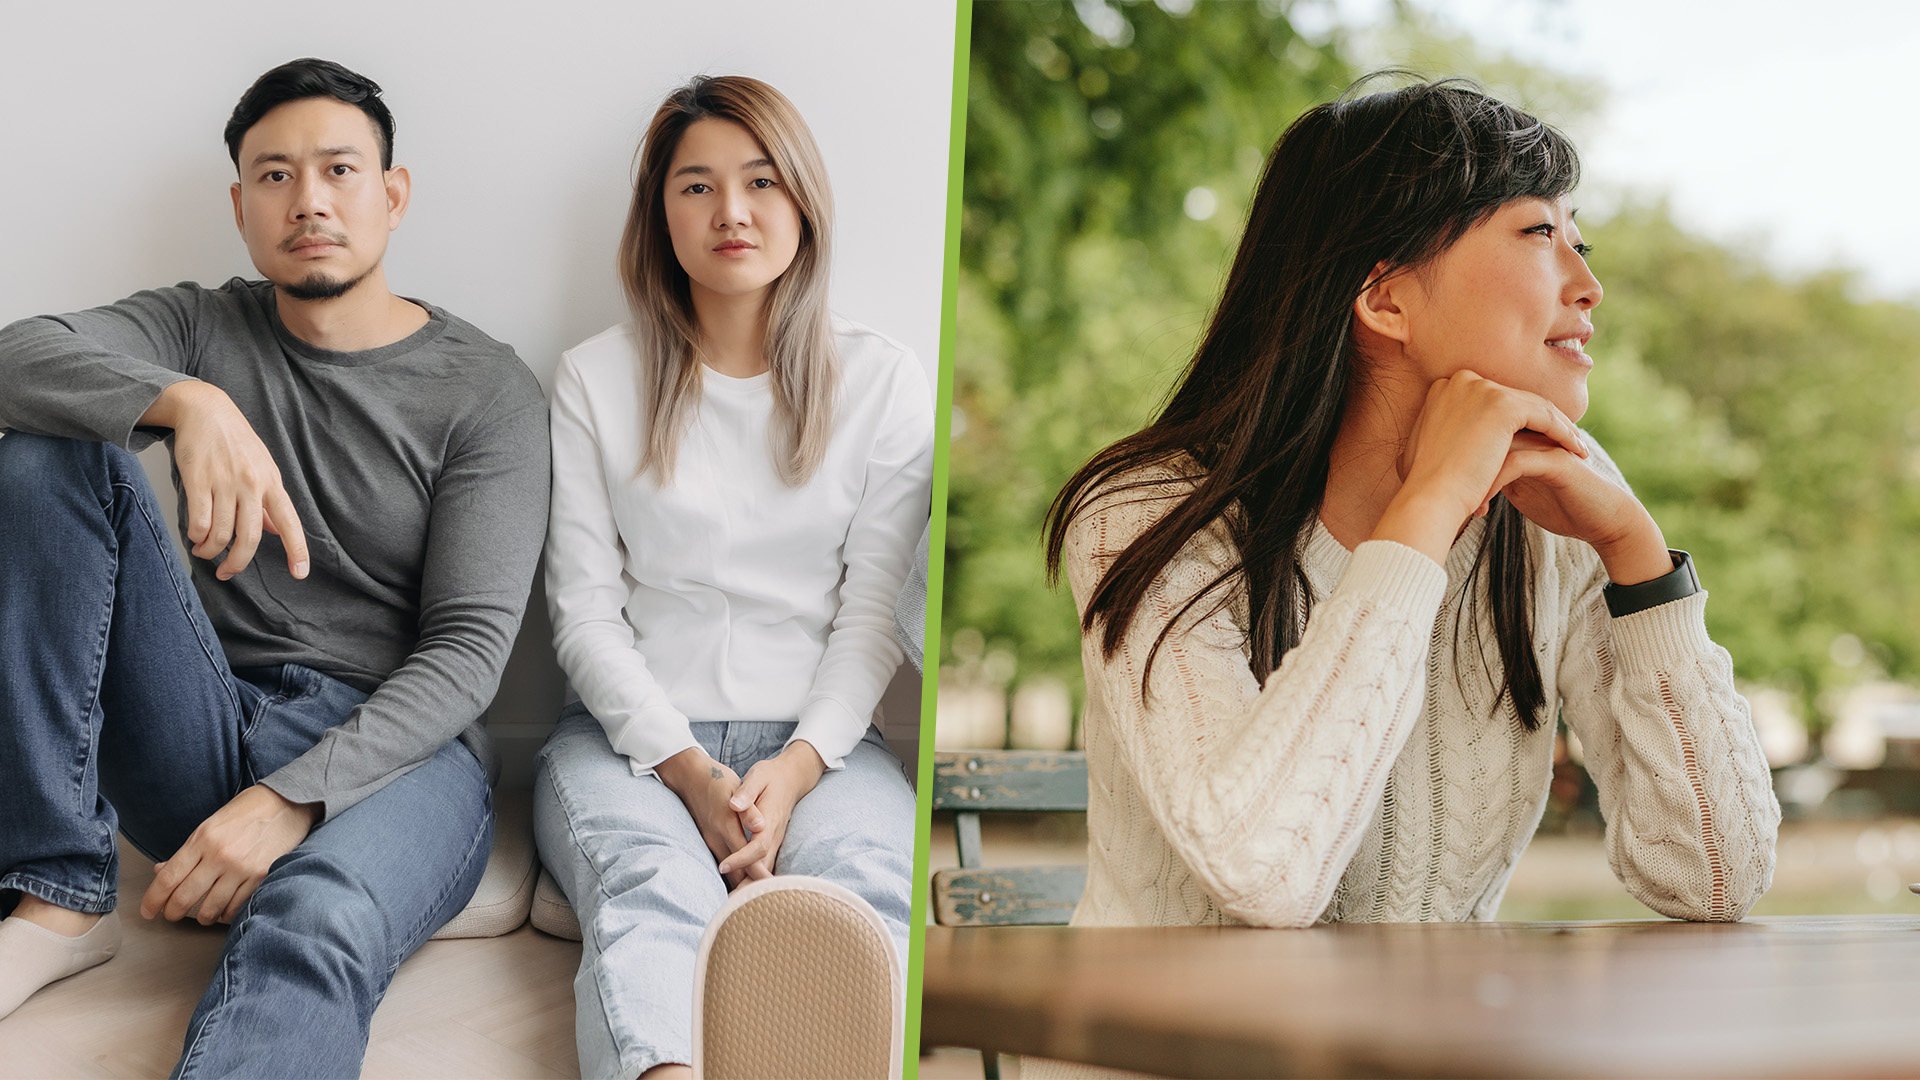 Young people in China are taking new approaches to dating and relationships. The Post explains why, and what they are. Photo: SCMP composite/Shutterstock